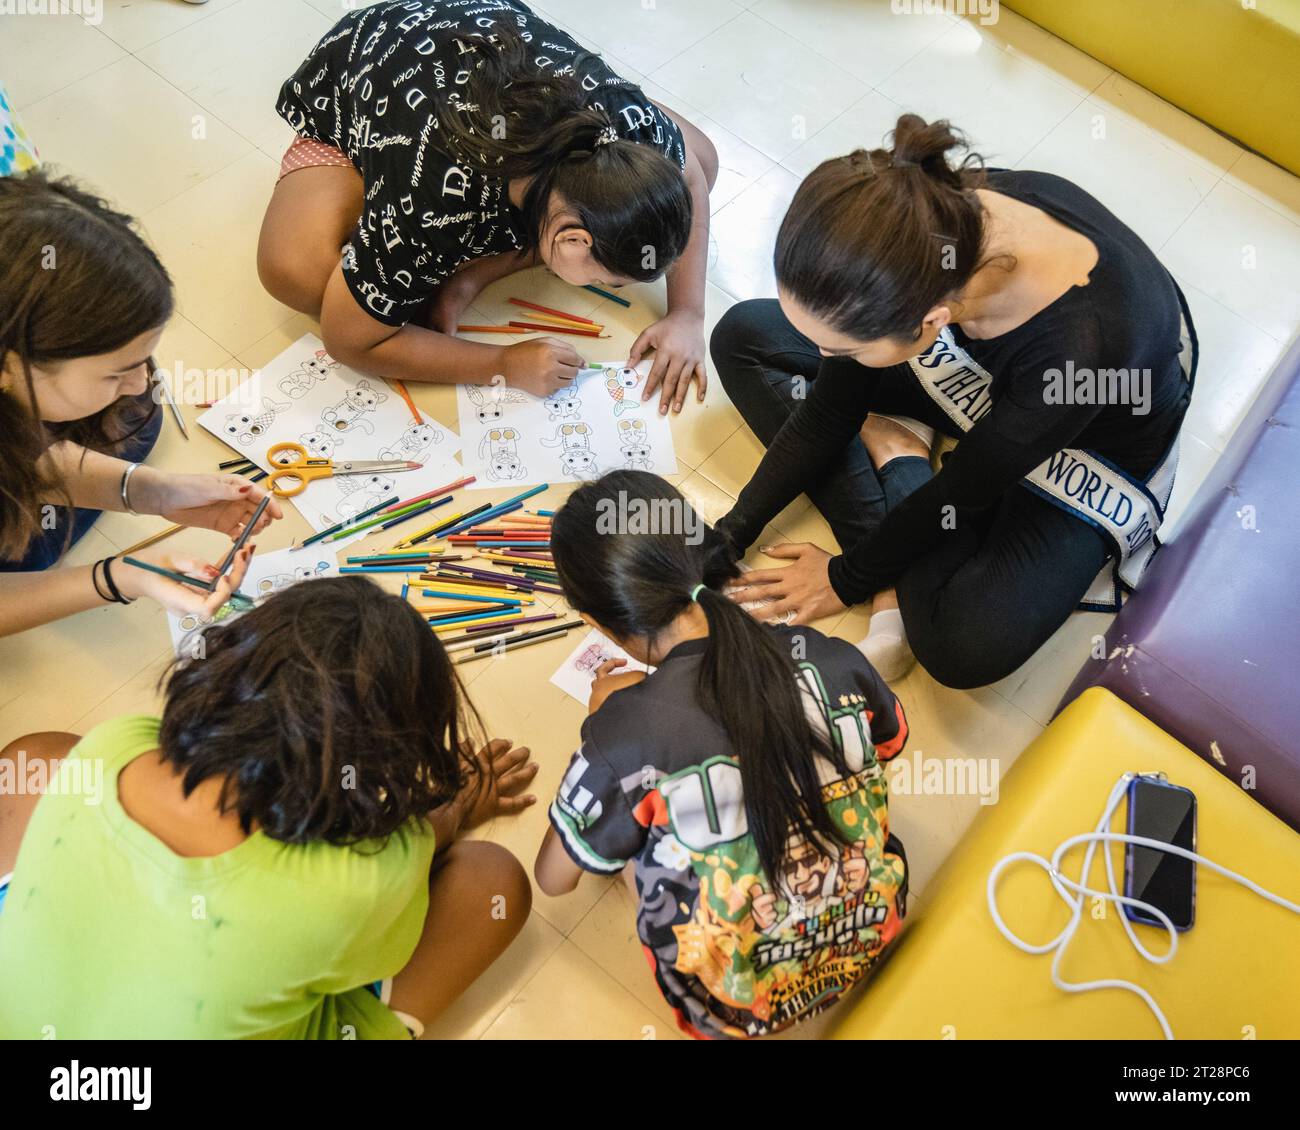 Bangkok, Thailand. 14th Oct, 2023. Tharina Botes, Miss Thailand World 2023 is seen helping kids learning English by playing a game, at the Bangkok Community Help Foundation Learning and Development Center, at Klong Toei, in Bangkok. Miss Thailand World 2023, Tharina Botes, mixed Thai-South African heritage joined as a volunteer in a free weekly English program for kids and adults, organized by the Bangkok Community Help Foundation, at Klong Toei, Bangkok's biggest slum. (Photo by Nathalie Jamois/SOPA Images/Sipa USA) Credit: Sipa USA/Alamy Live News Stock Photo